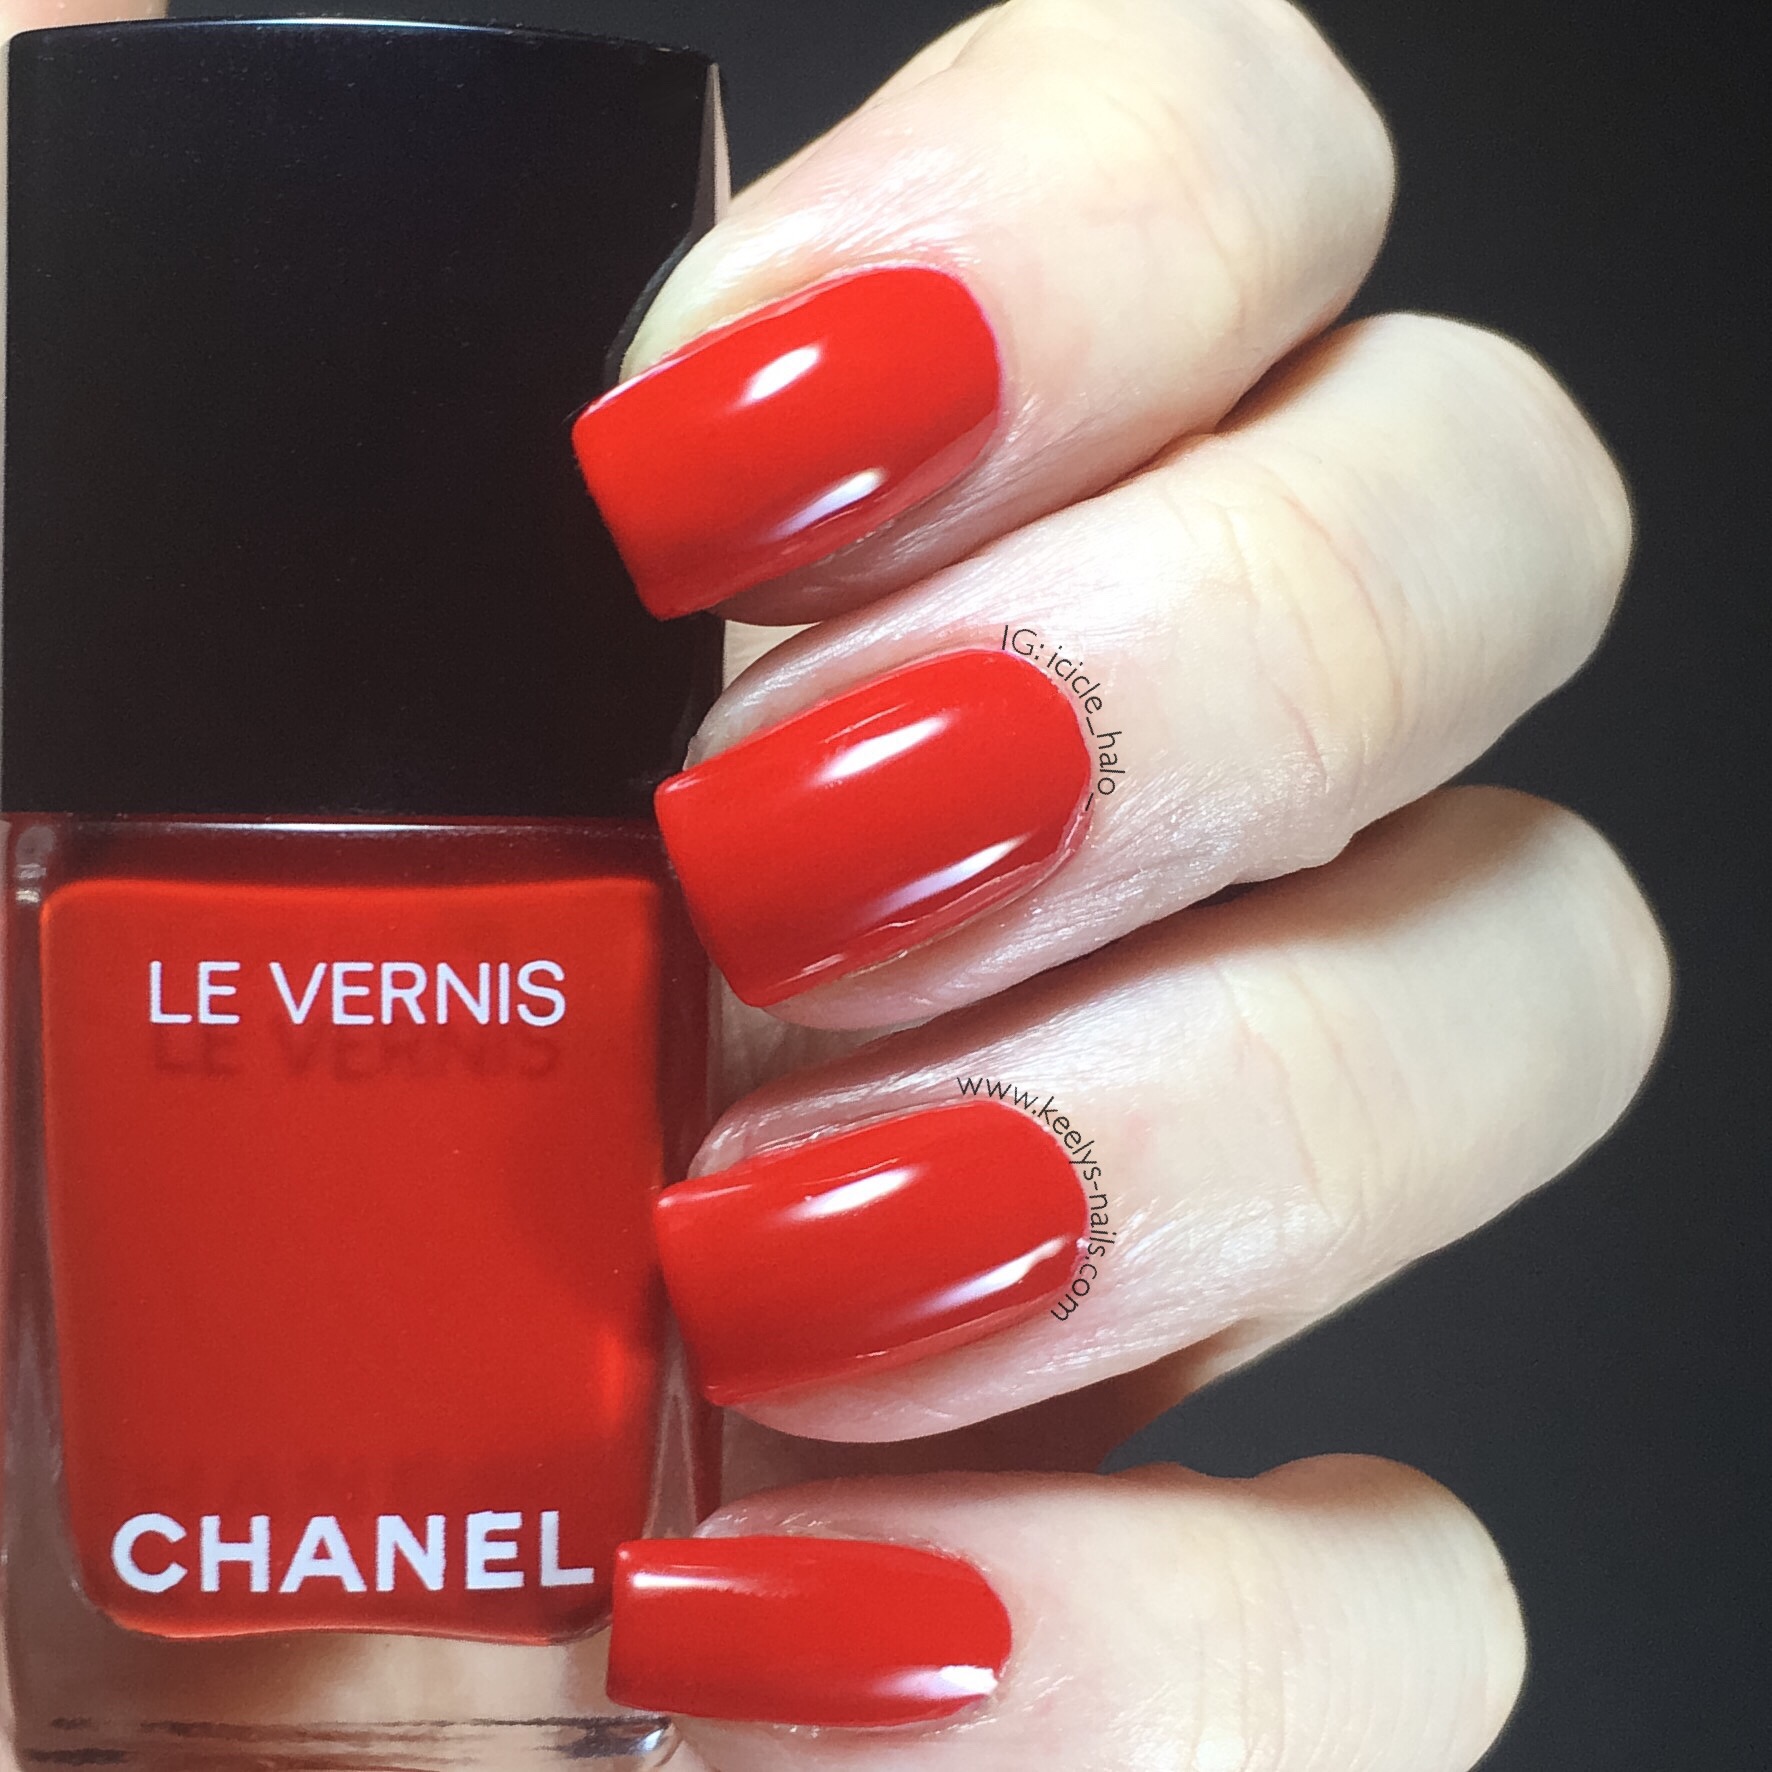 Chanel Summer 2016 Swatches - Keely's Nails